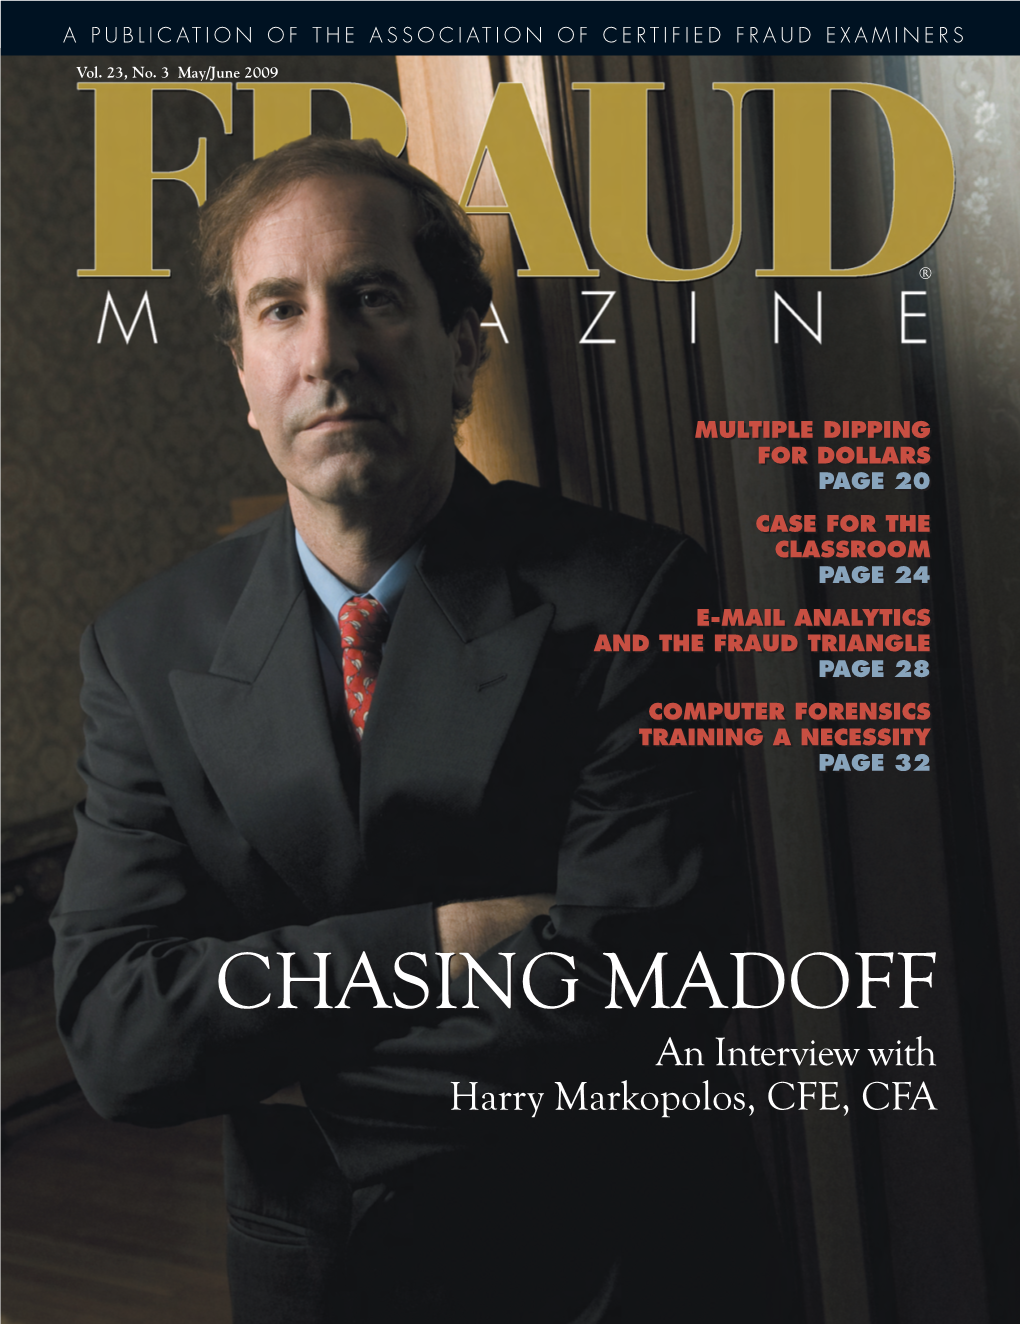 Chasing Madoff Online Or Onsite